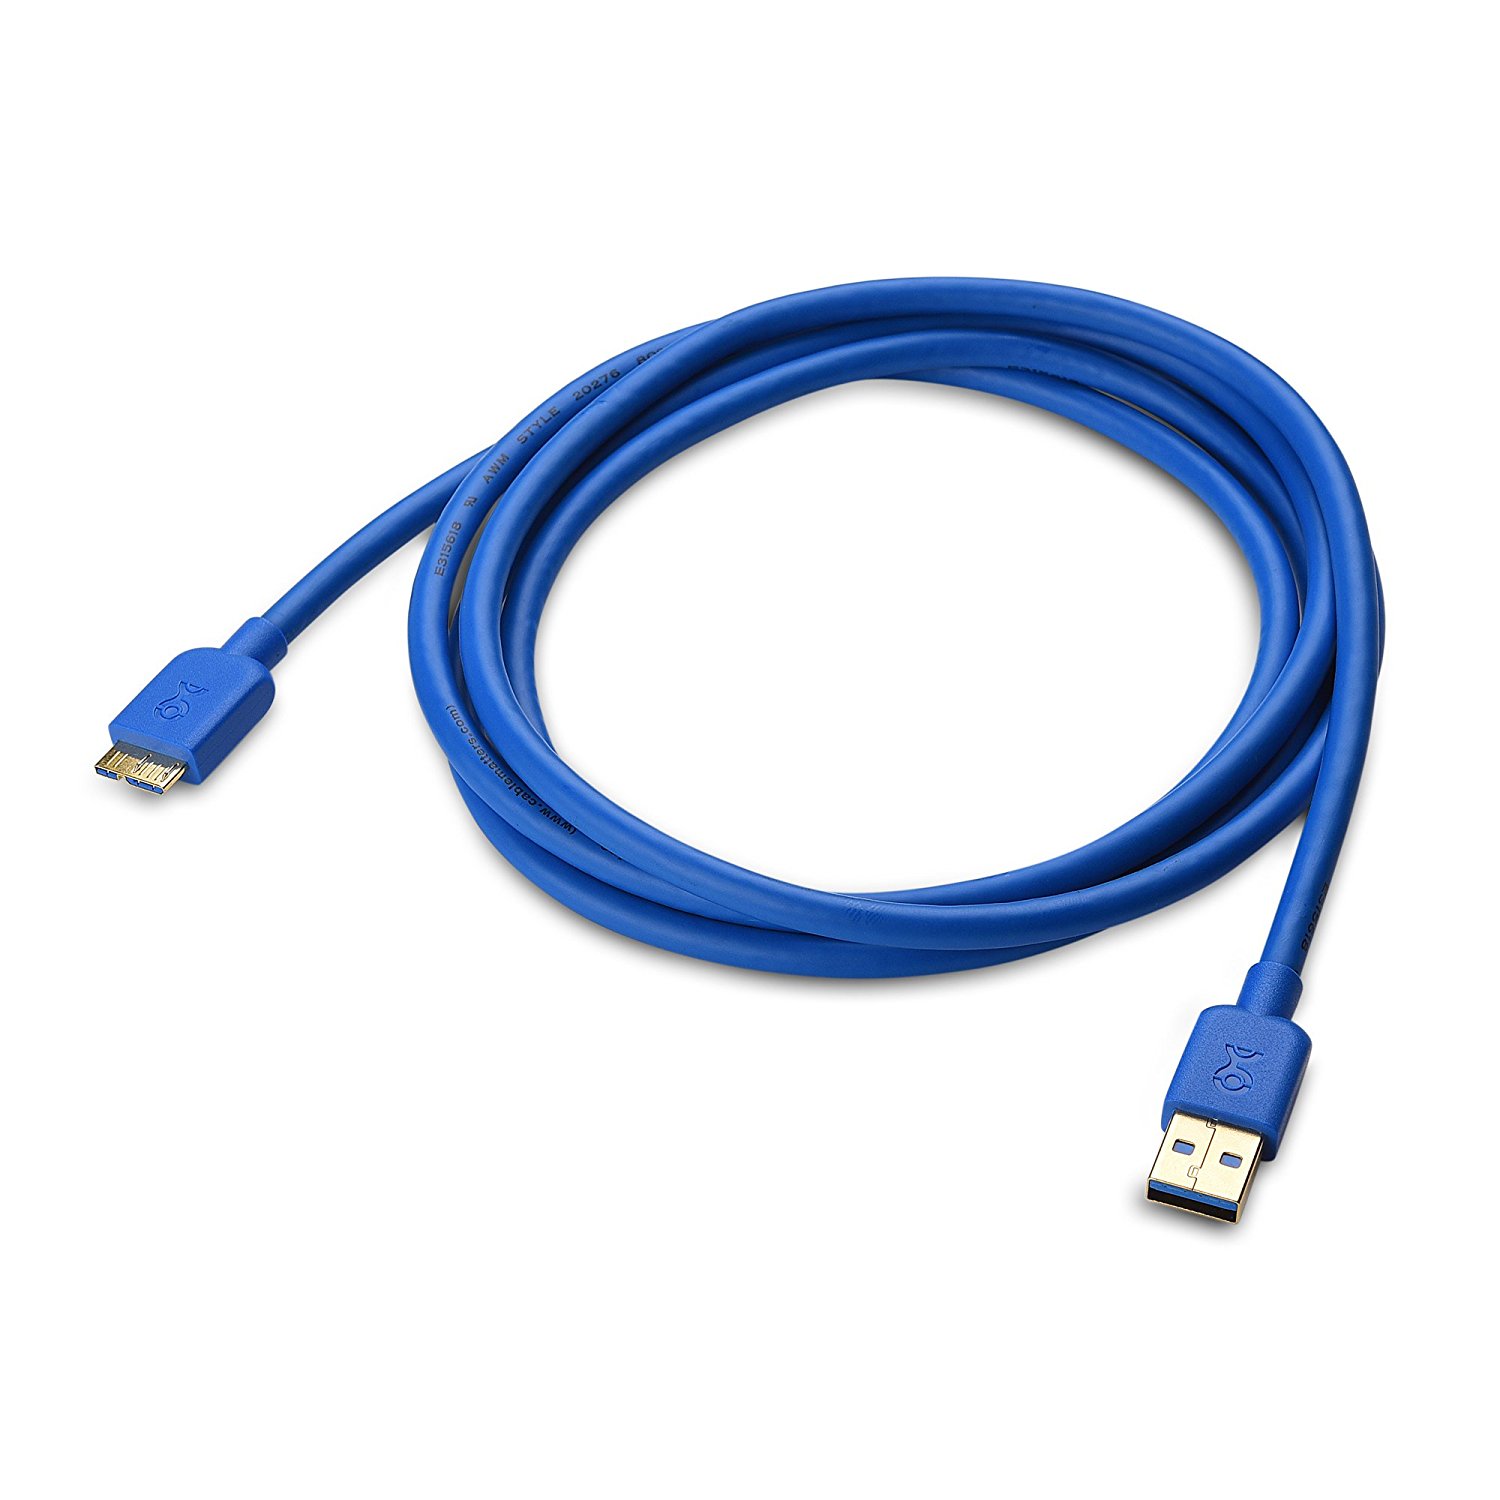 Amazon.com: Cable Matters Micro USB 3.0 Cable (Micro USB 3 Cable A ...